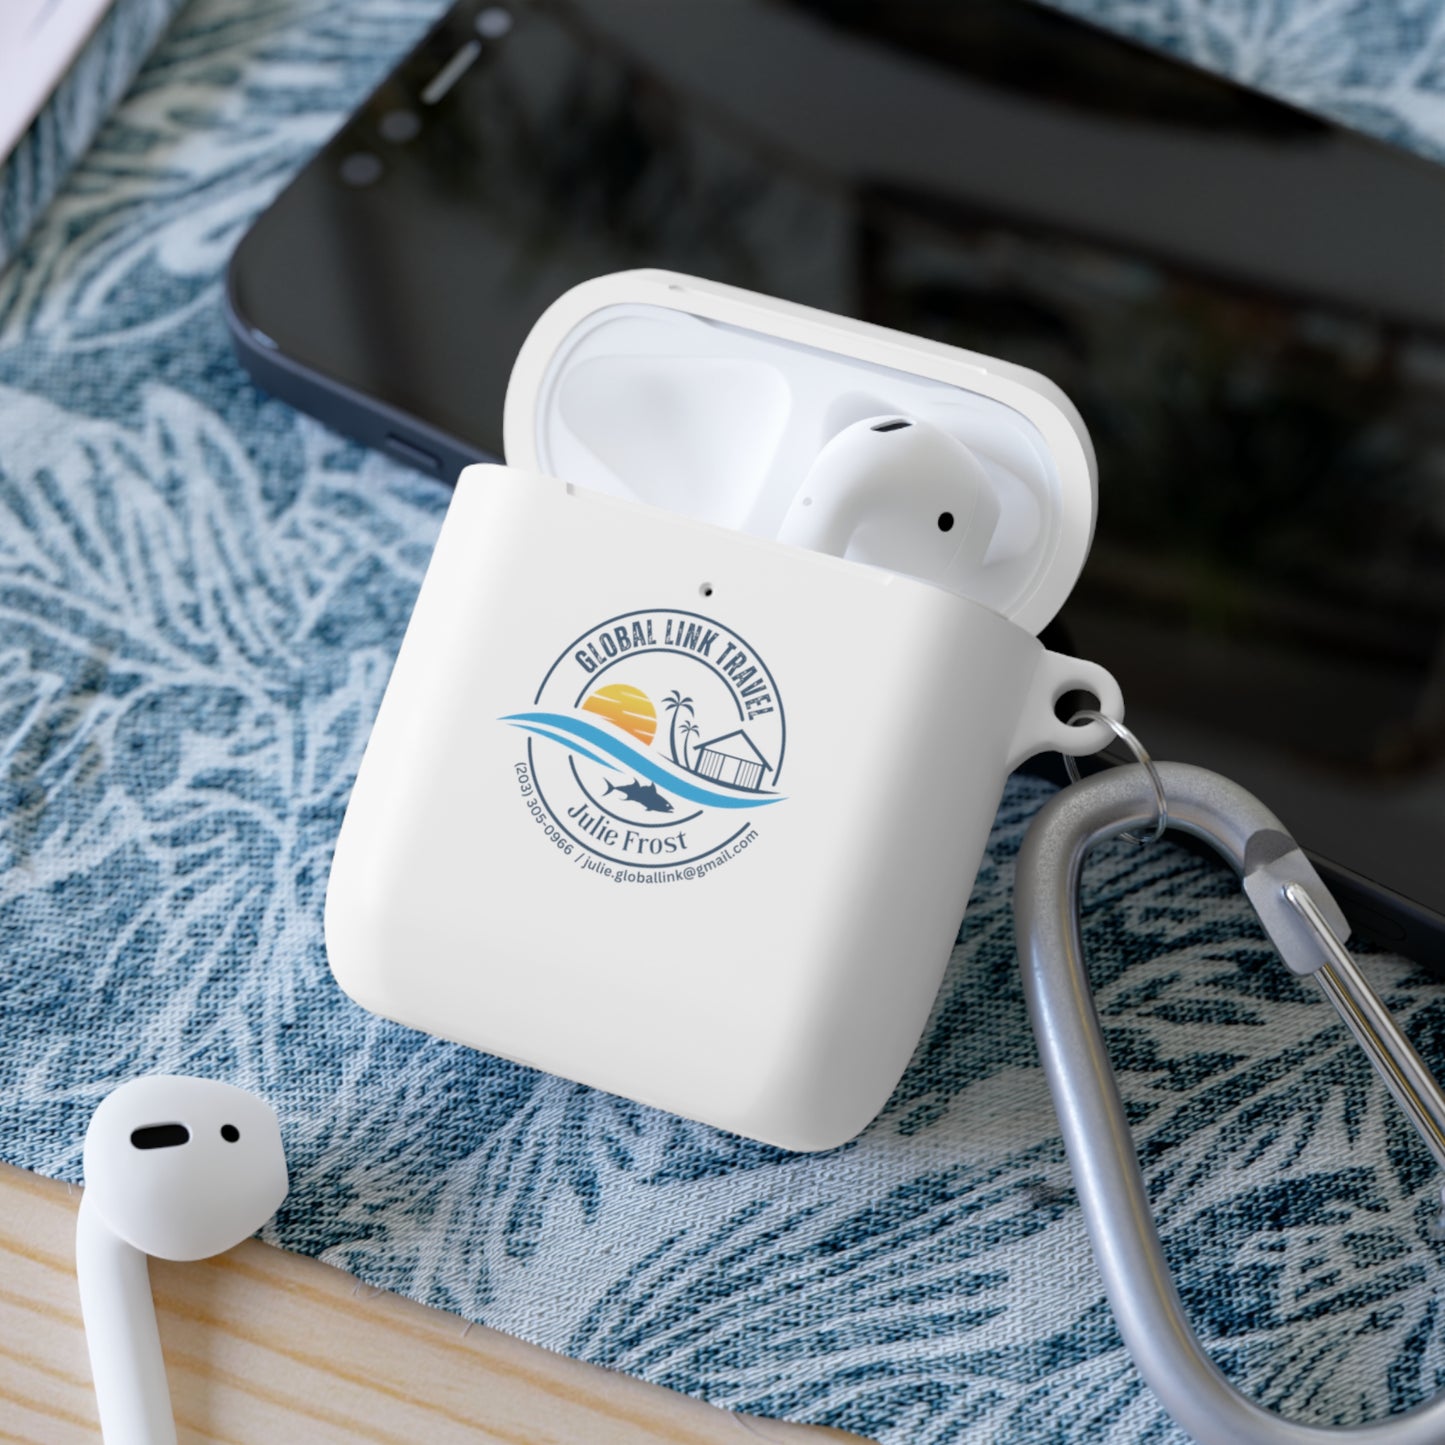 Global Link Travel AirPods and AirPods Pro Case Cover